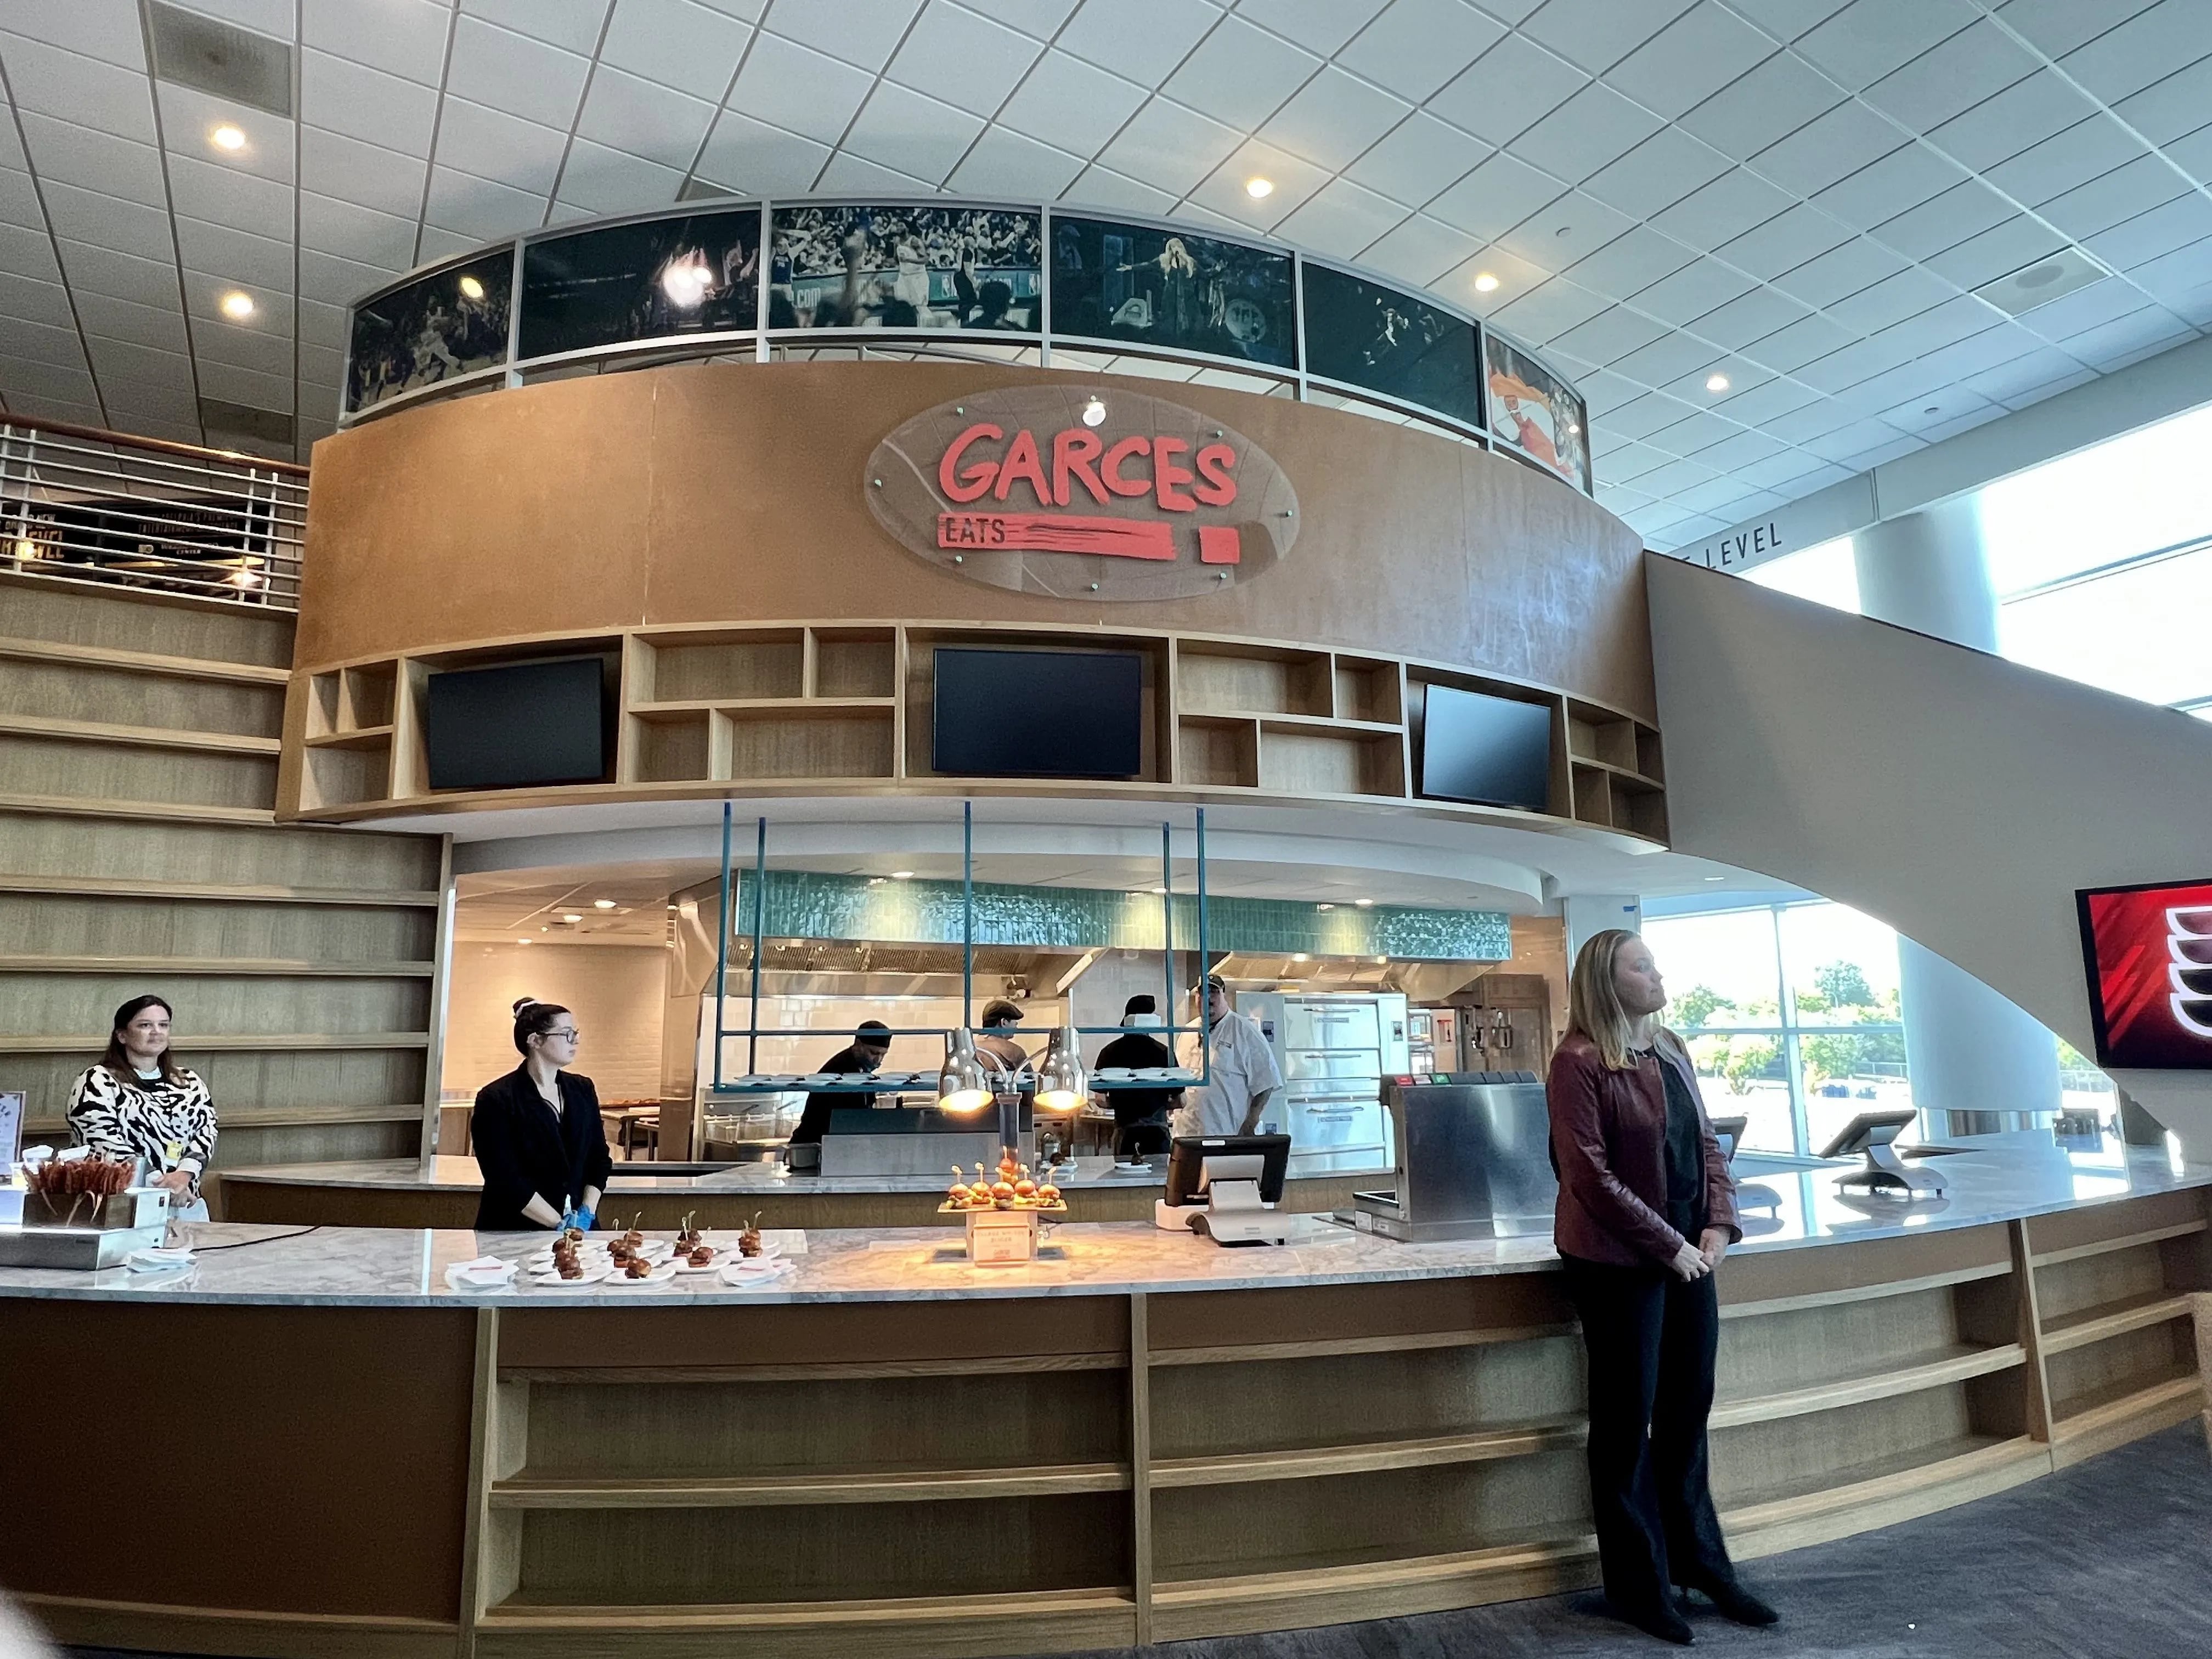 The new food coming to the Wells Fargo Center